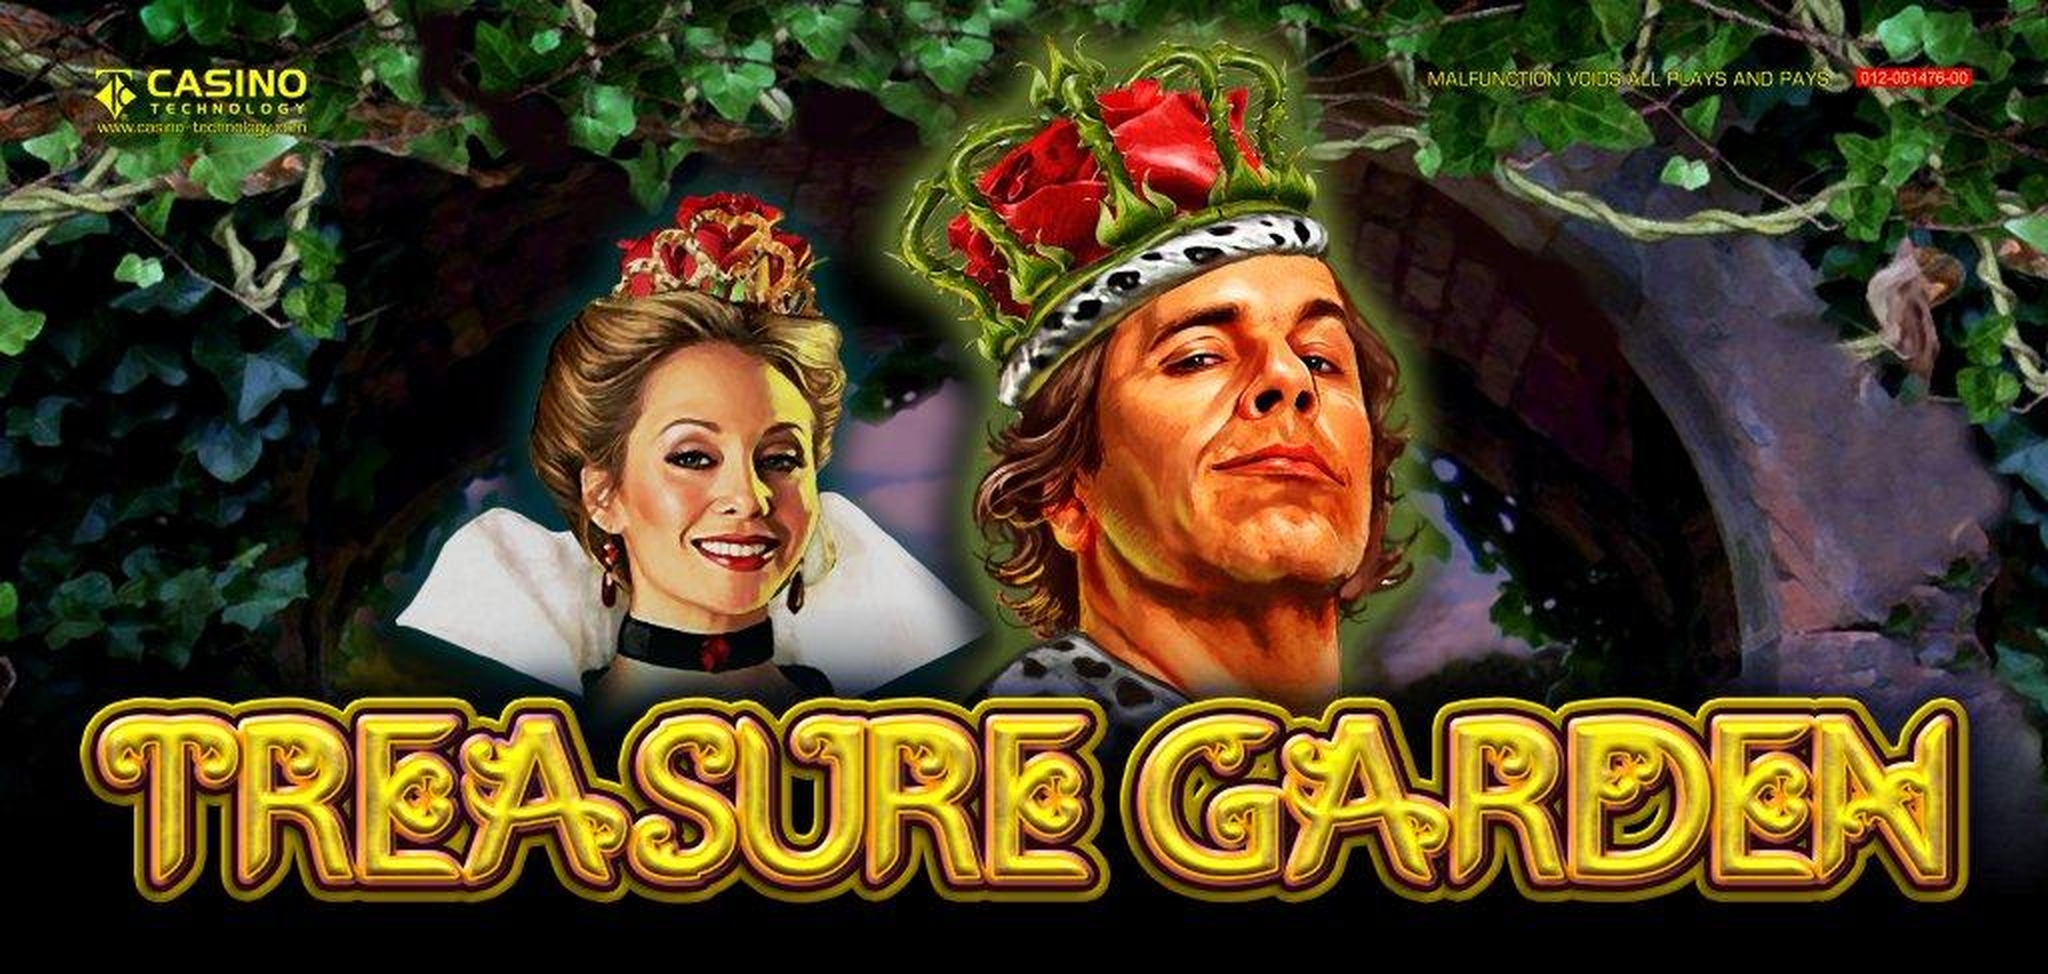 The Treasure Garden Online Slot Demo Game by casino technology